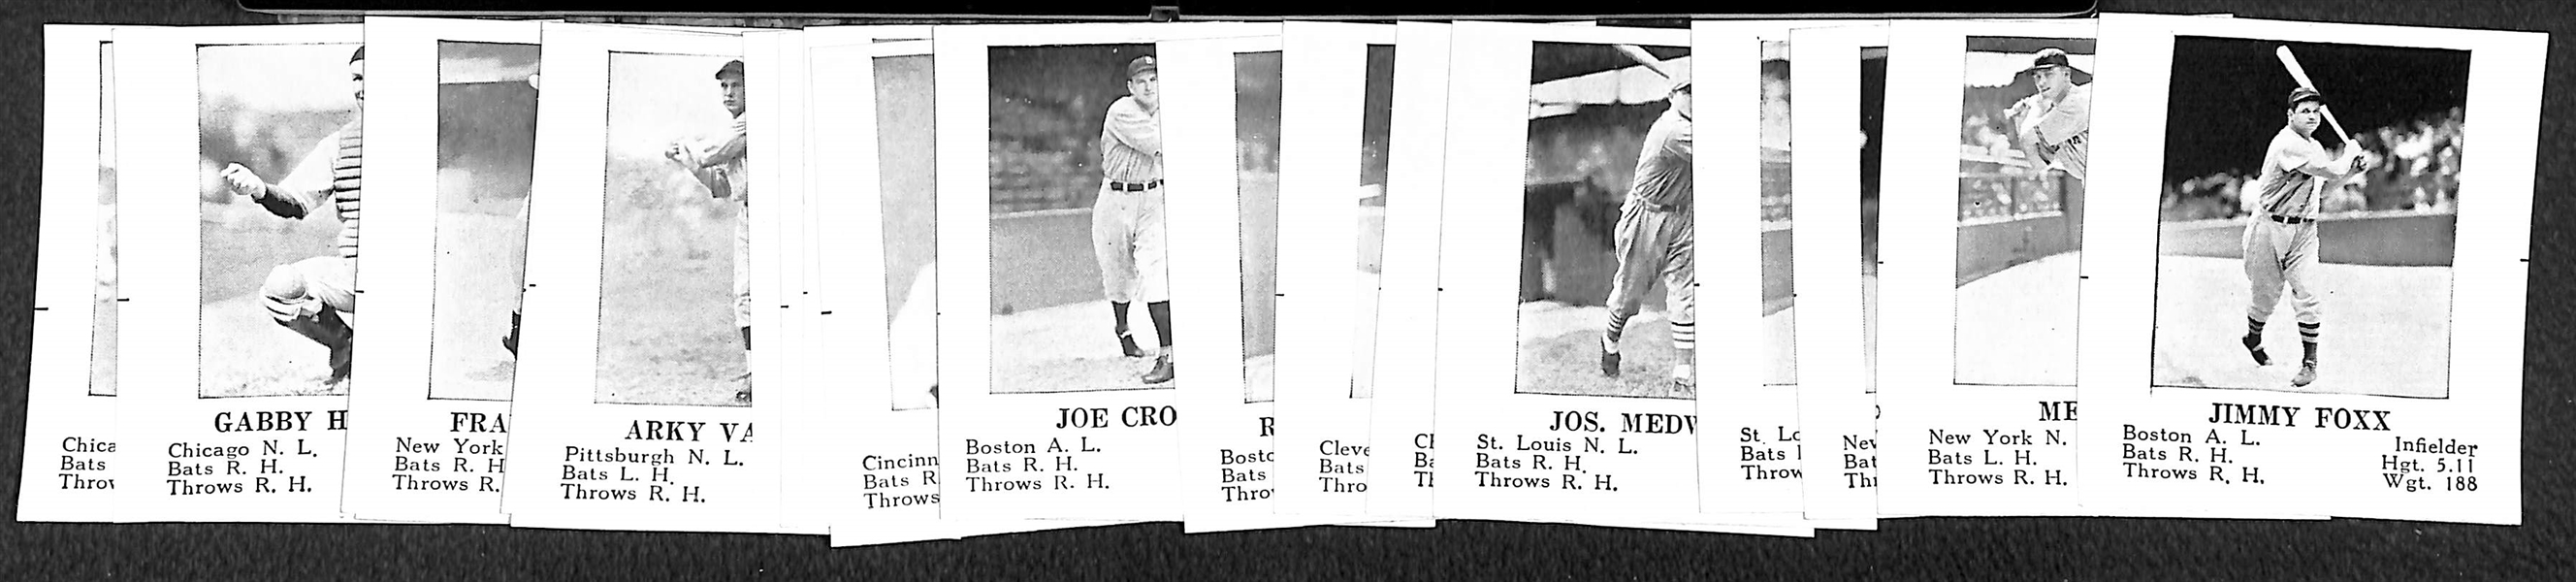 Lot of (21) 1936 S&S Game Cards (Trimmed on Both Sides) w. Foxx, Ott, Hubbell (Mostly HOFers)